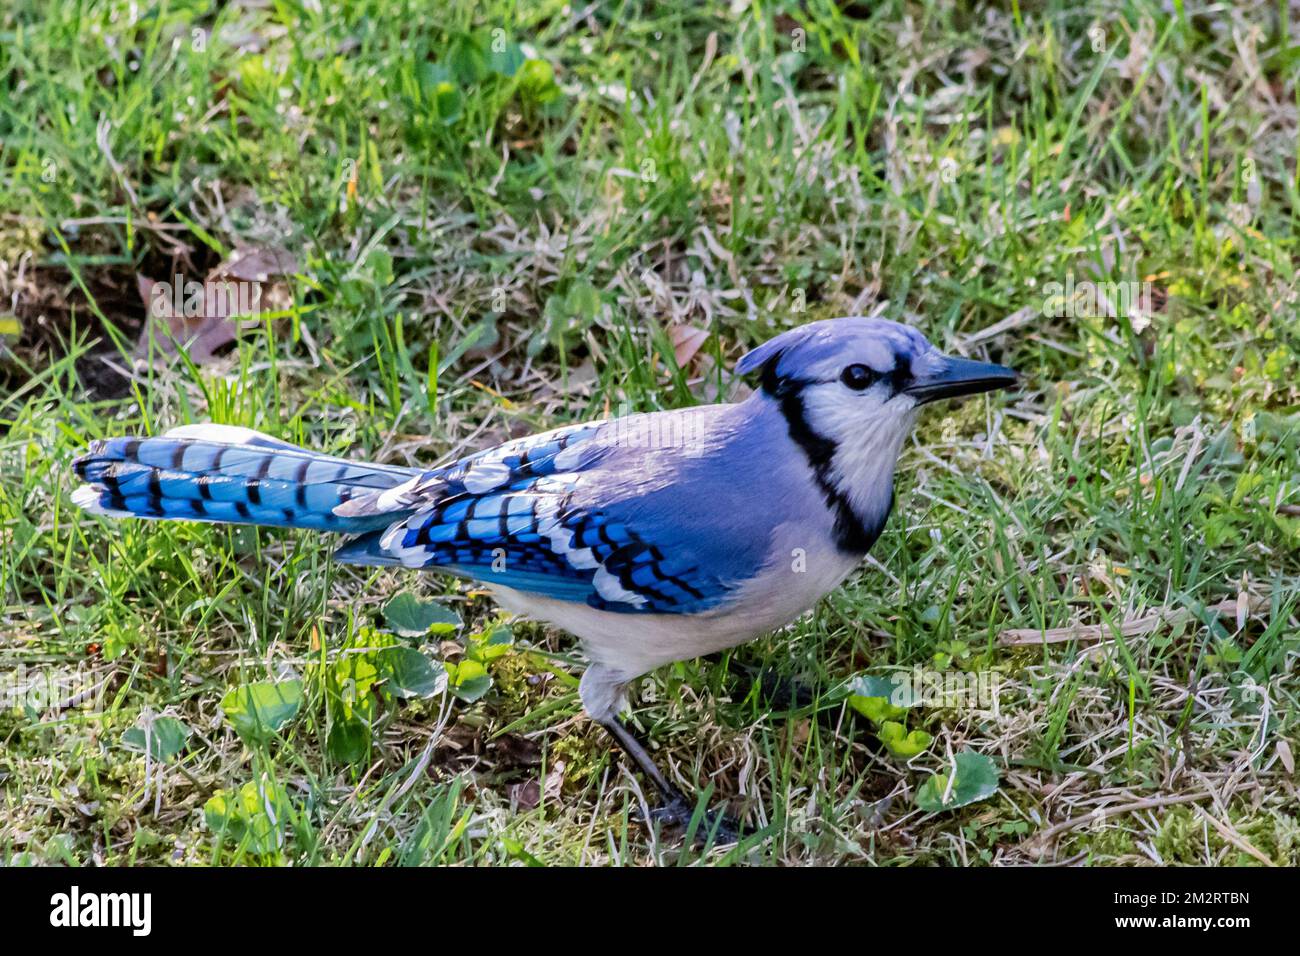 A close-up shot of blue jay on the grass Stock Photo